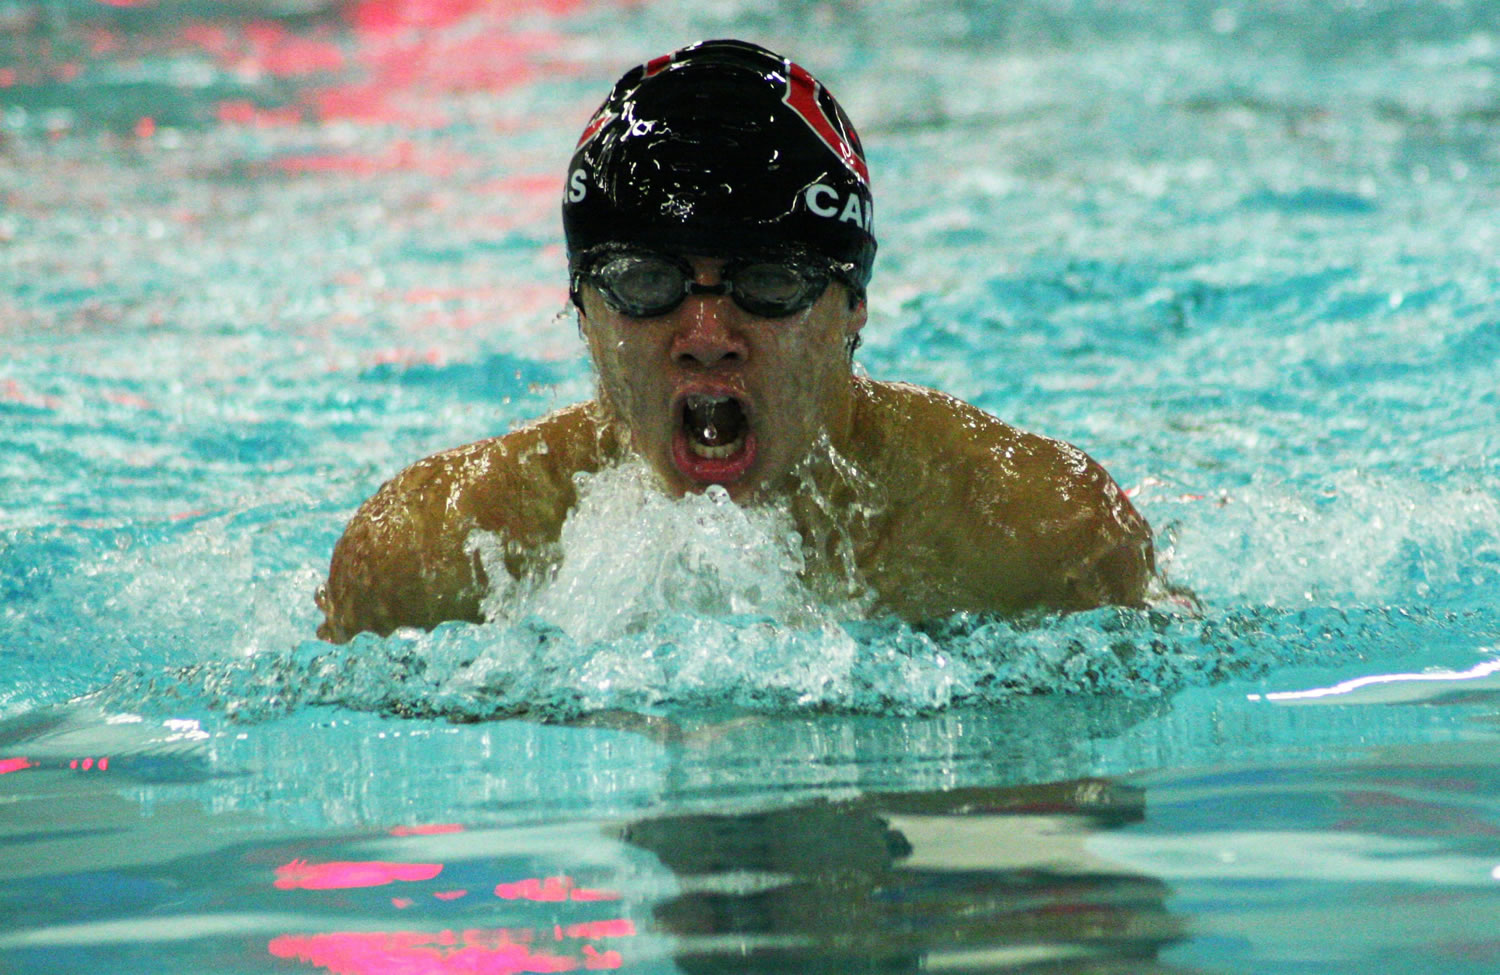 John Utas charges through the water in the 100-meter breaststroke.